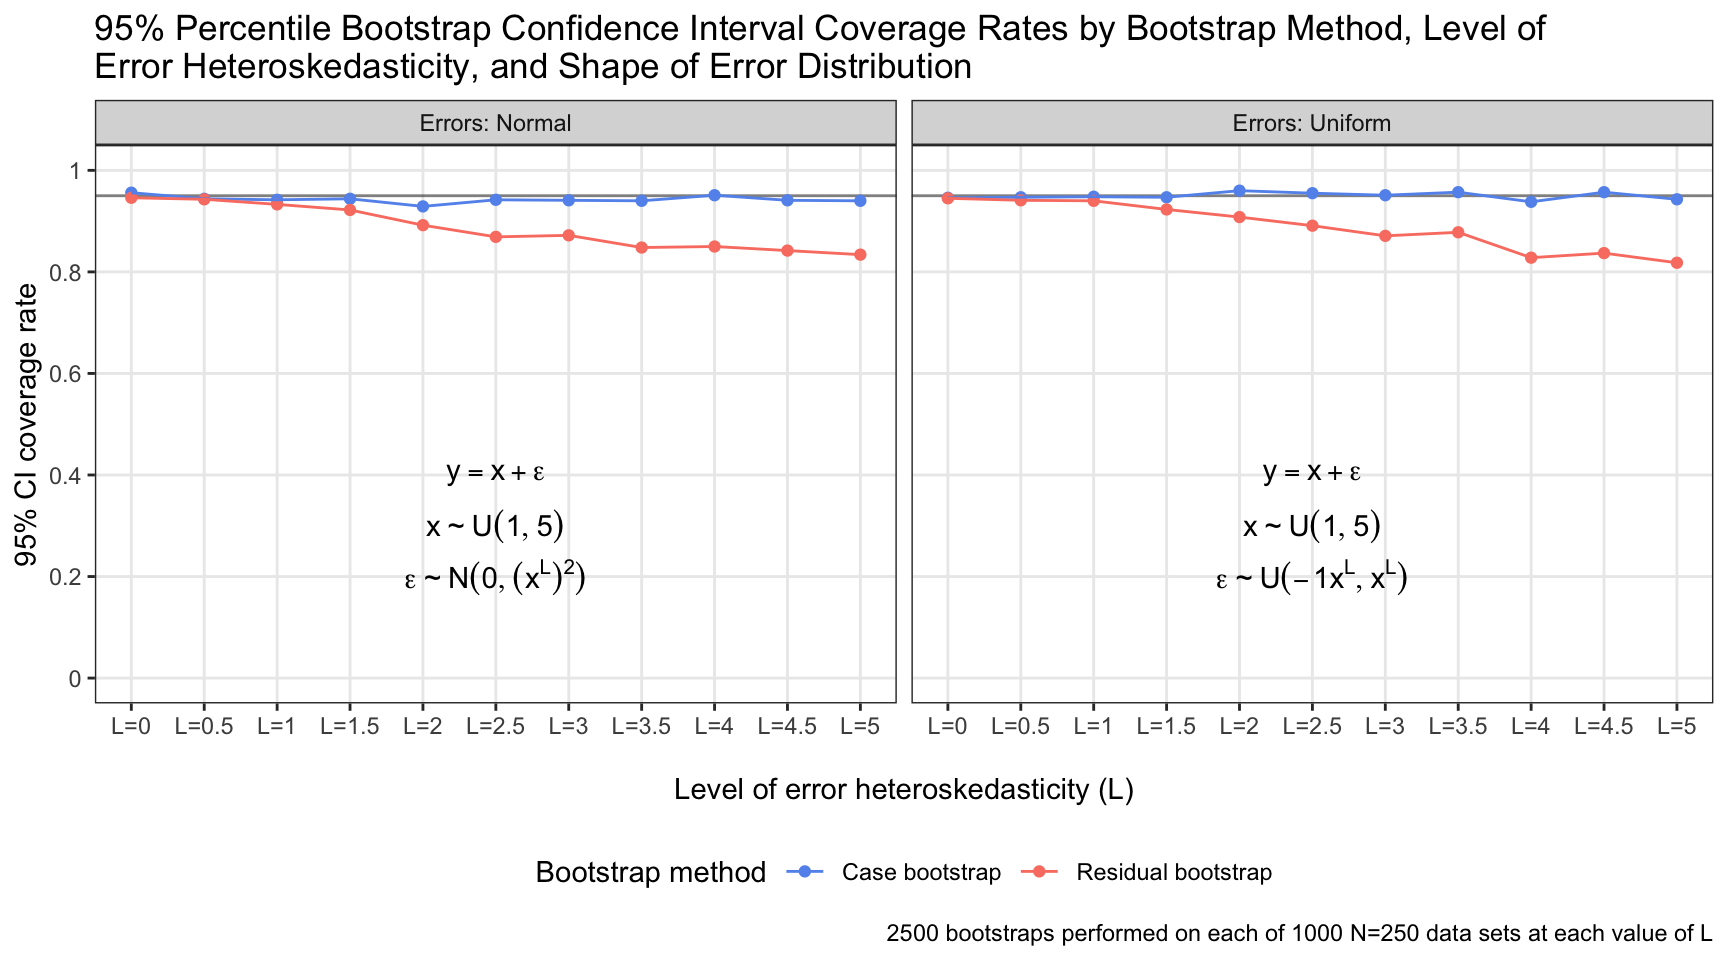 residual and case bootstrap confidence interval coverage rates